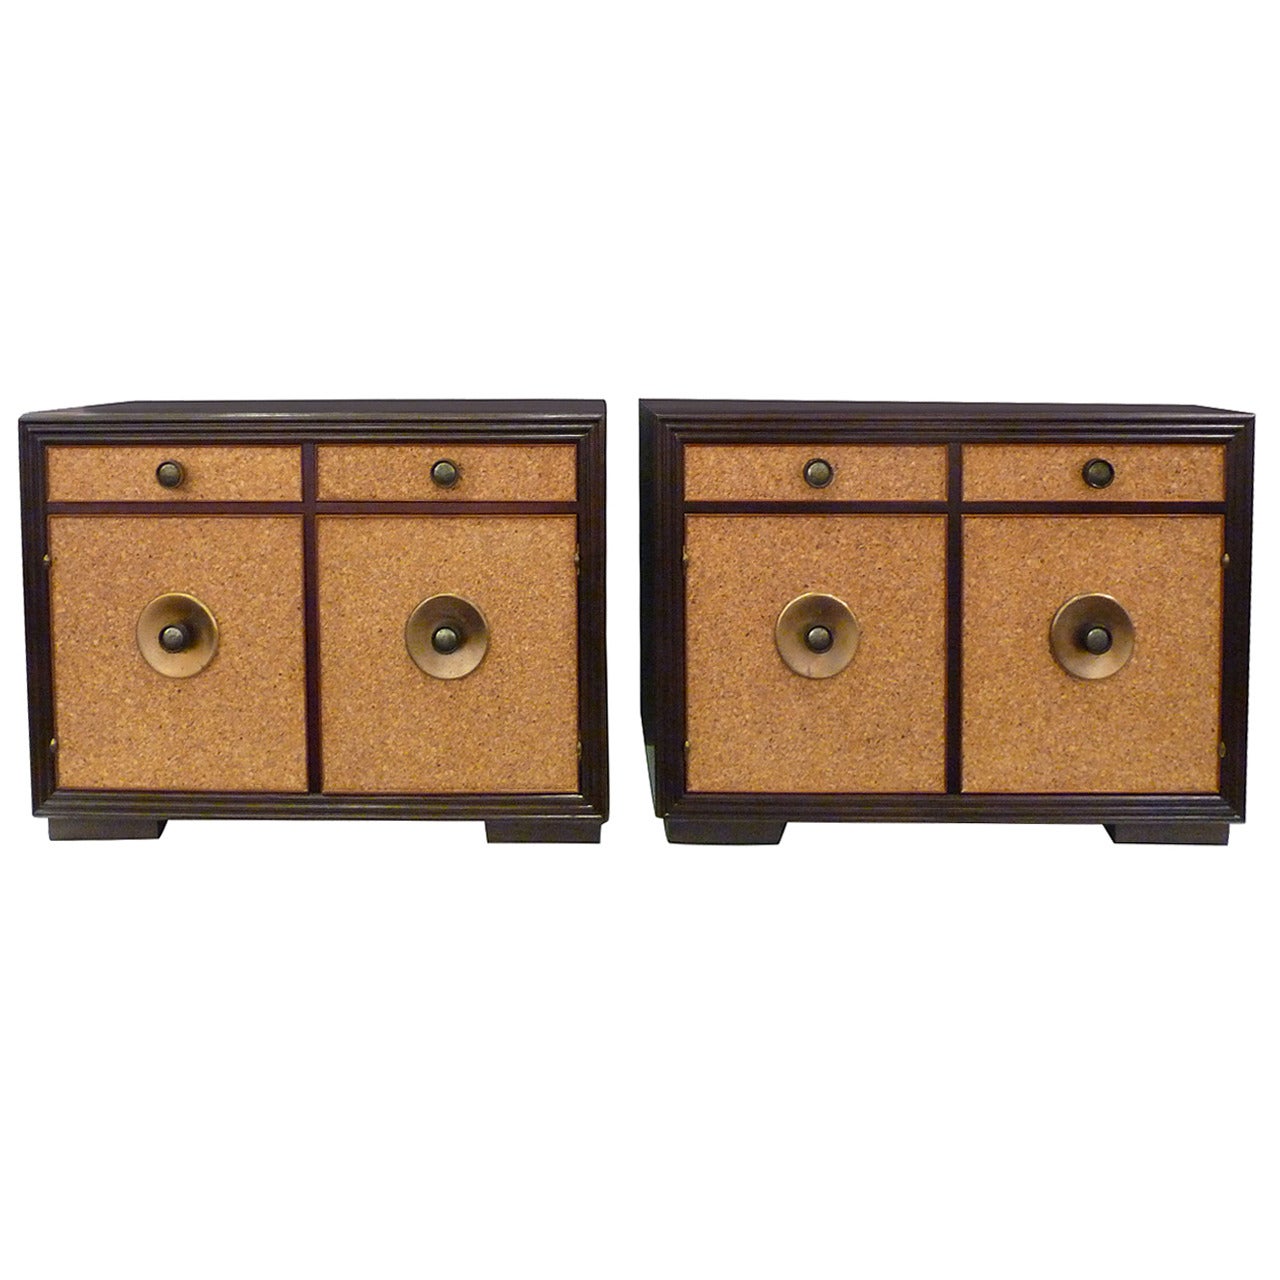 Pair of Cabinets or Oversized Nightstands by Paul Frankl